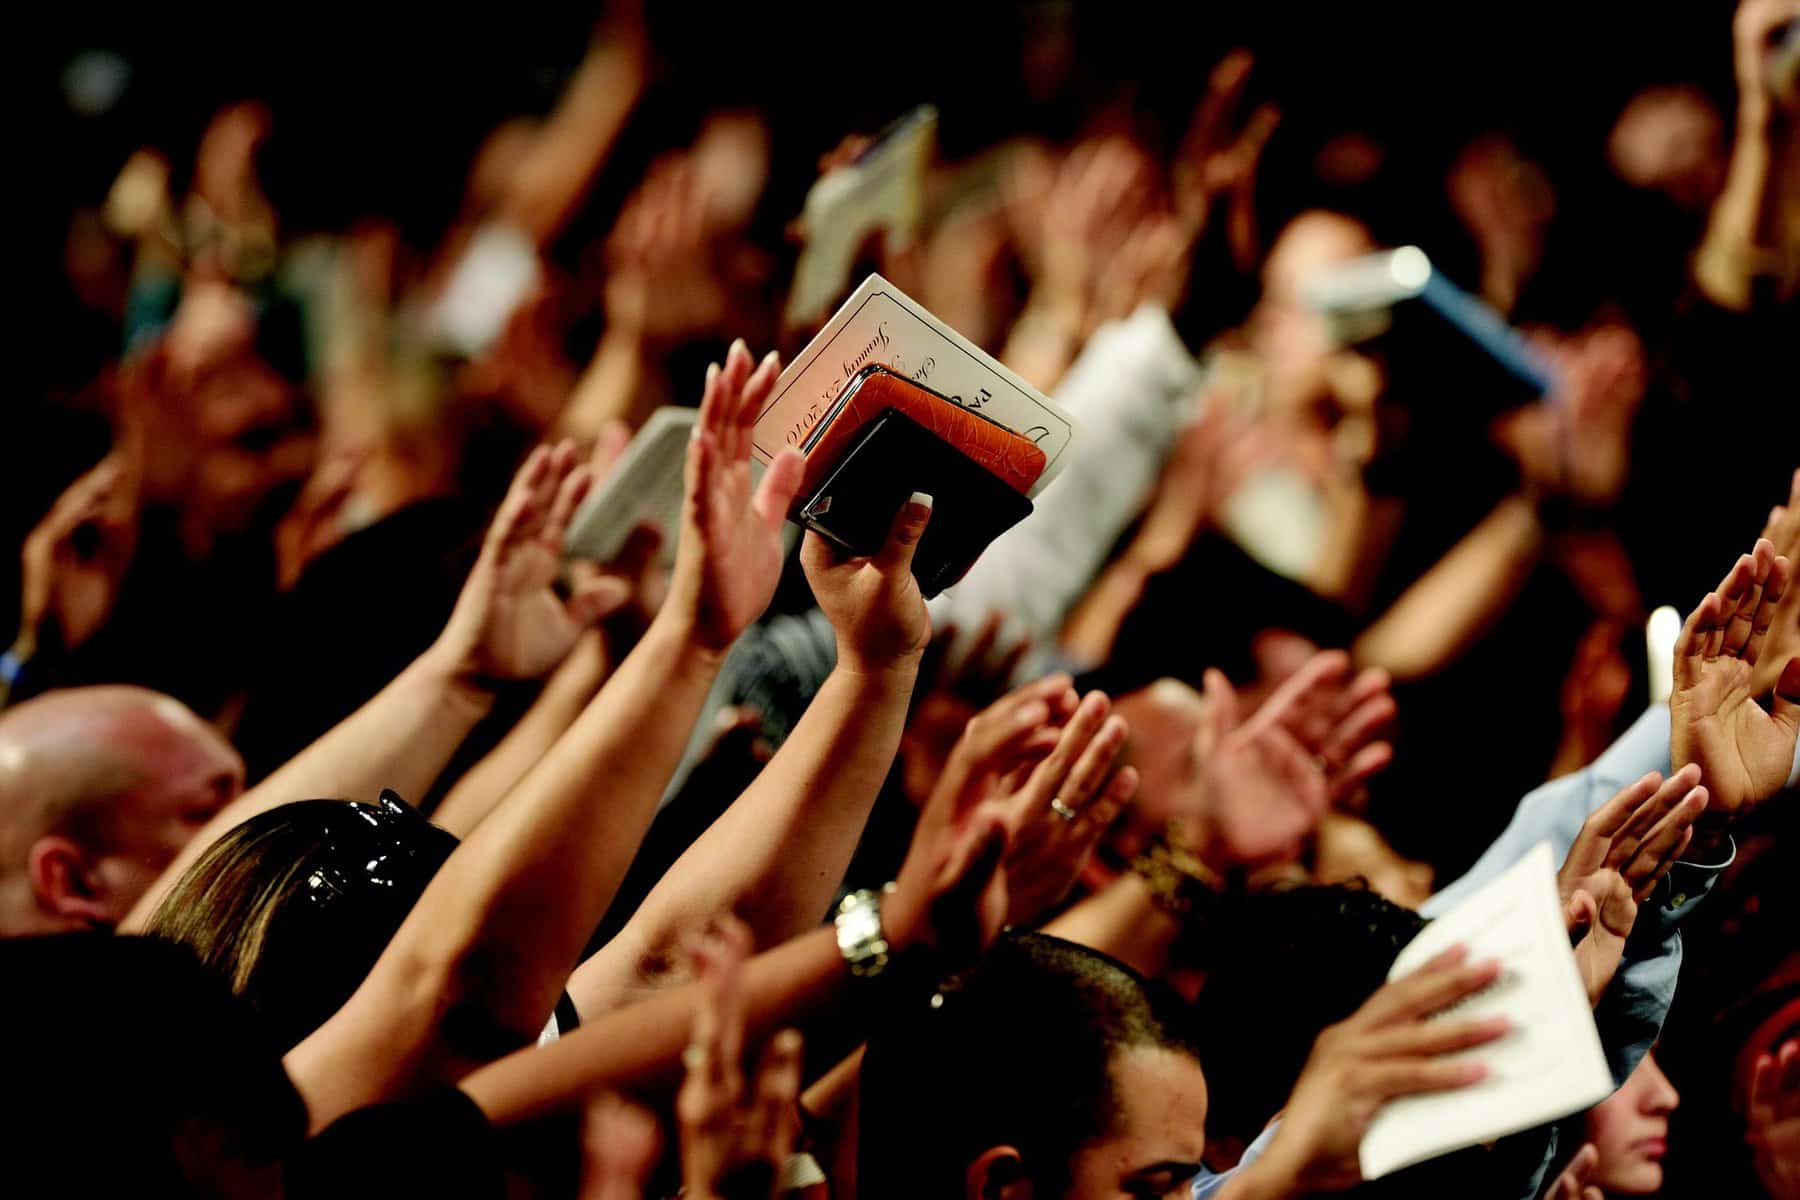 Hands a bibles are raised up in a large meeting space, perhaps a church.